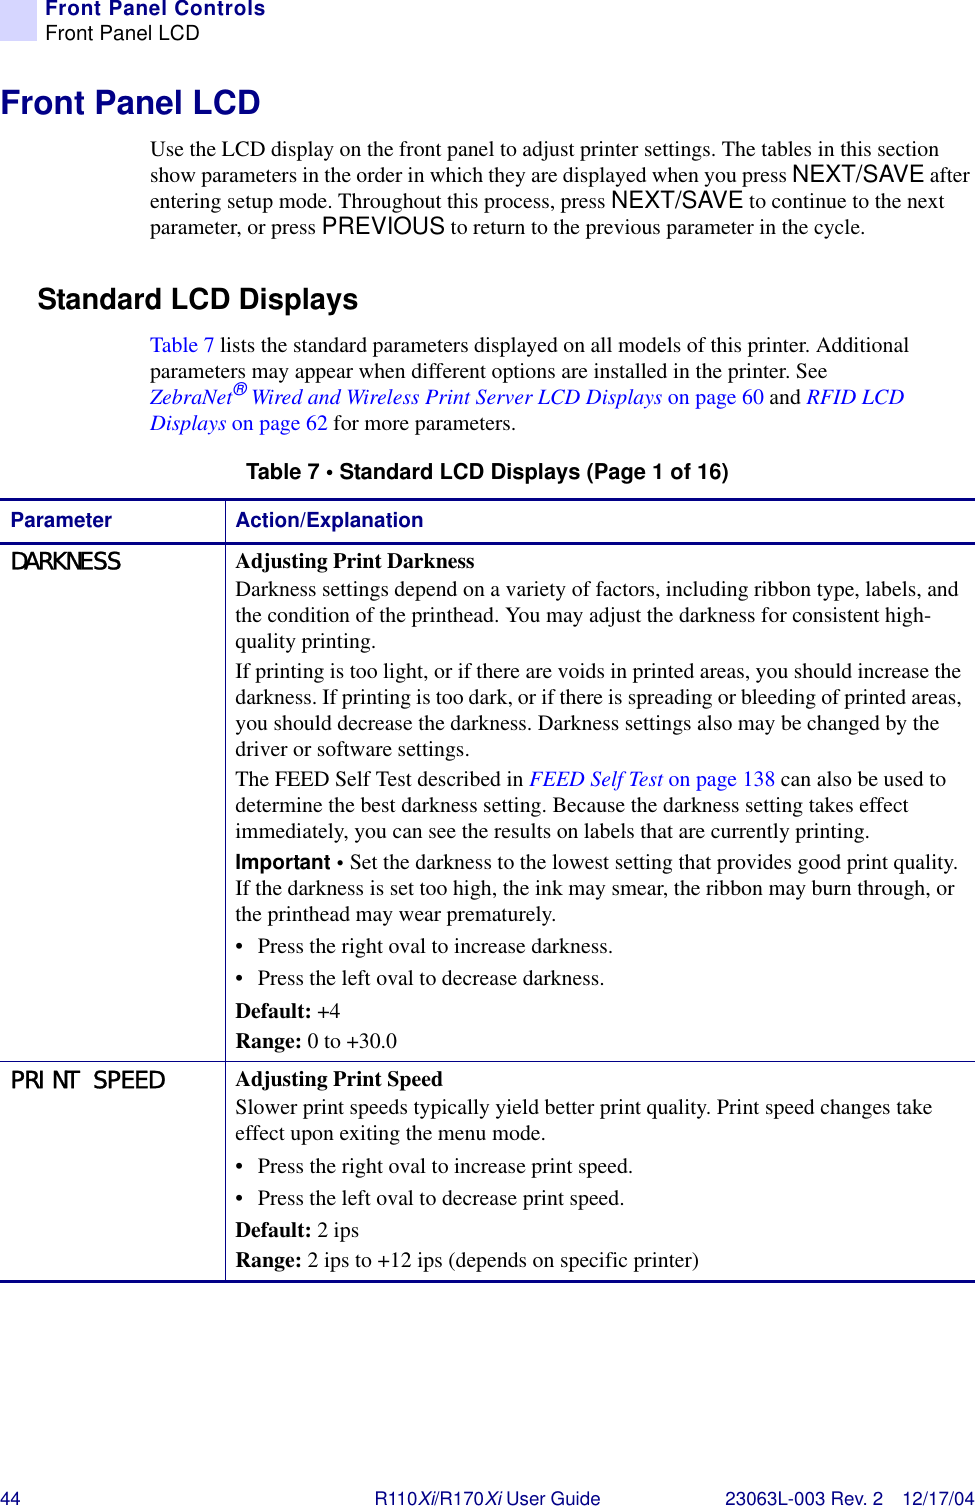 44 R110Xi/R170Xi User Guide 23063L-003 Rev. 2 12/17/04Front Panel ControlsFront Panel LCDFront Panel LCDUse the LCD display on the front panel to adjust printer settings. The tables in this section show parameters in the order in which they are displayed when you press NEXT/SAVE after entering setup mode. Throughout this process, press NEXT/SAVE to continue to the next parameter, or press PREVIOUS to return to the previous parameter in the cycle.Standard LCD DisplaysTable 7 lists the standard parameters displayed on all models of this printer. Additional parameters may appear when different options are installed in the printer. See ZebraNet®Wired and Wireless Print Server LCD Displays on page 60 and RFID LCD Displays on page 62 for more parameters.Table 7 • Standard LCD Displays (Page 1 of 16)Parameter Action/ExplanationDARKNESS Adjusting Print DarknessDarkness settings depend on a variety of factors, including ribbon type, labels, and the condition of the printhead. You may adjust the darkness for consistent high-quality printing.If printing is too light, or if there are voids in printed areas, you should increase the darkness. If printing is too dark, or if there is spreading or bleeding of printed areas, you should decrease the darkness. Darkness settings also may be changed by the driver or software settings.The FEED Self Test described in FEED Self Test on page 138 can also be used to determine the best darkness setting. Because the darkness setting takes effect immediately, you can see the results on labels that are currently printing.Important • Set the darkness to the lowest setting that provides good print quality. If the darkness is set too high, the ink may smear, the ribbon may burn through, or the printhead may wear prematurely.• Press the right oval to increase darkness.• Press the left oval to decrease darkness.Default: +4Range: 0 to +30.0PRINT SPEED Adjusting Print SpeedSlower print speeds typically yield better print quality. Print speed changes take effect upon exiting the menu mode.• Press the right oval to increase print speed. • Press the left oval to decrease print speed.Default: 2 ipsRange: 2 ips to +12 ips (depends on specific printer)